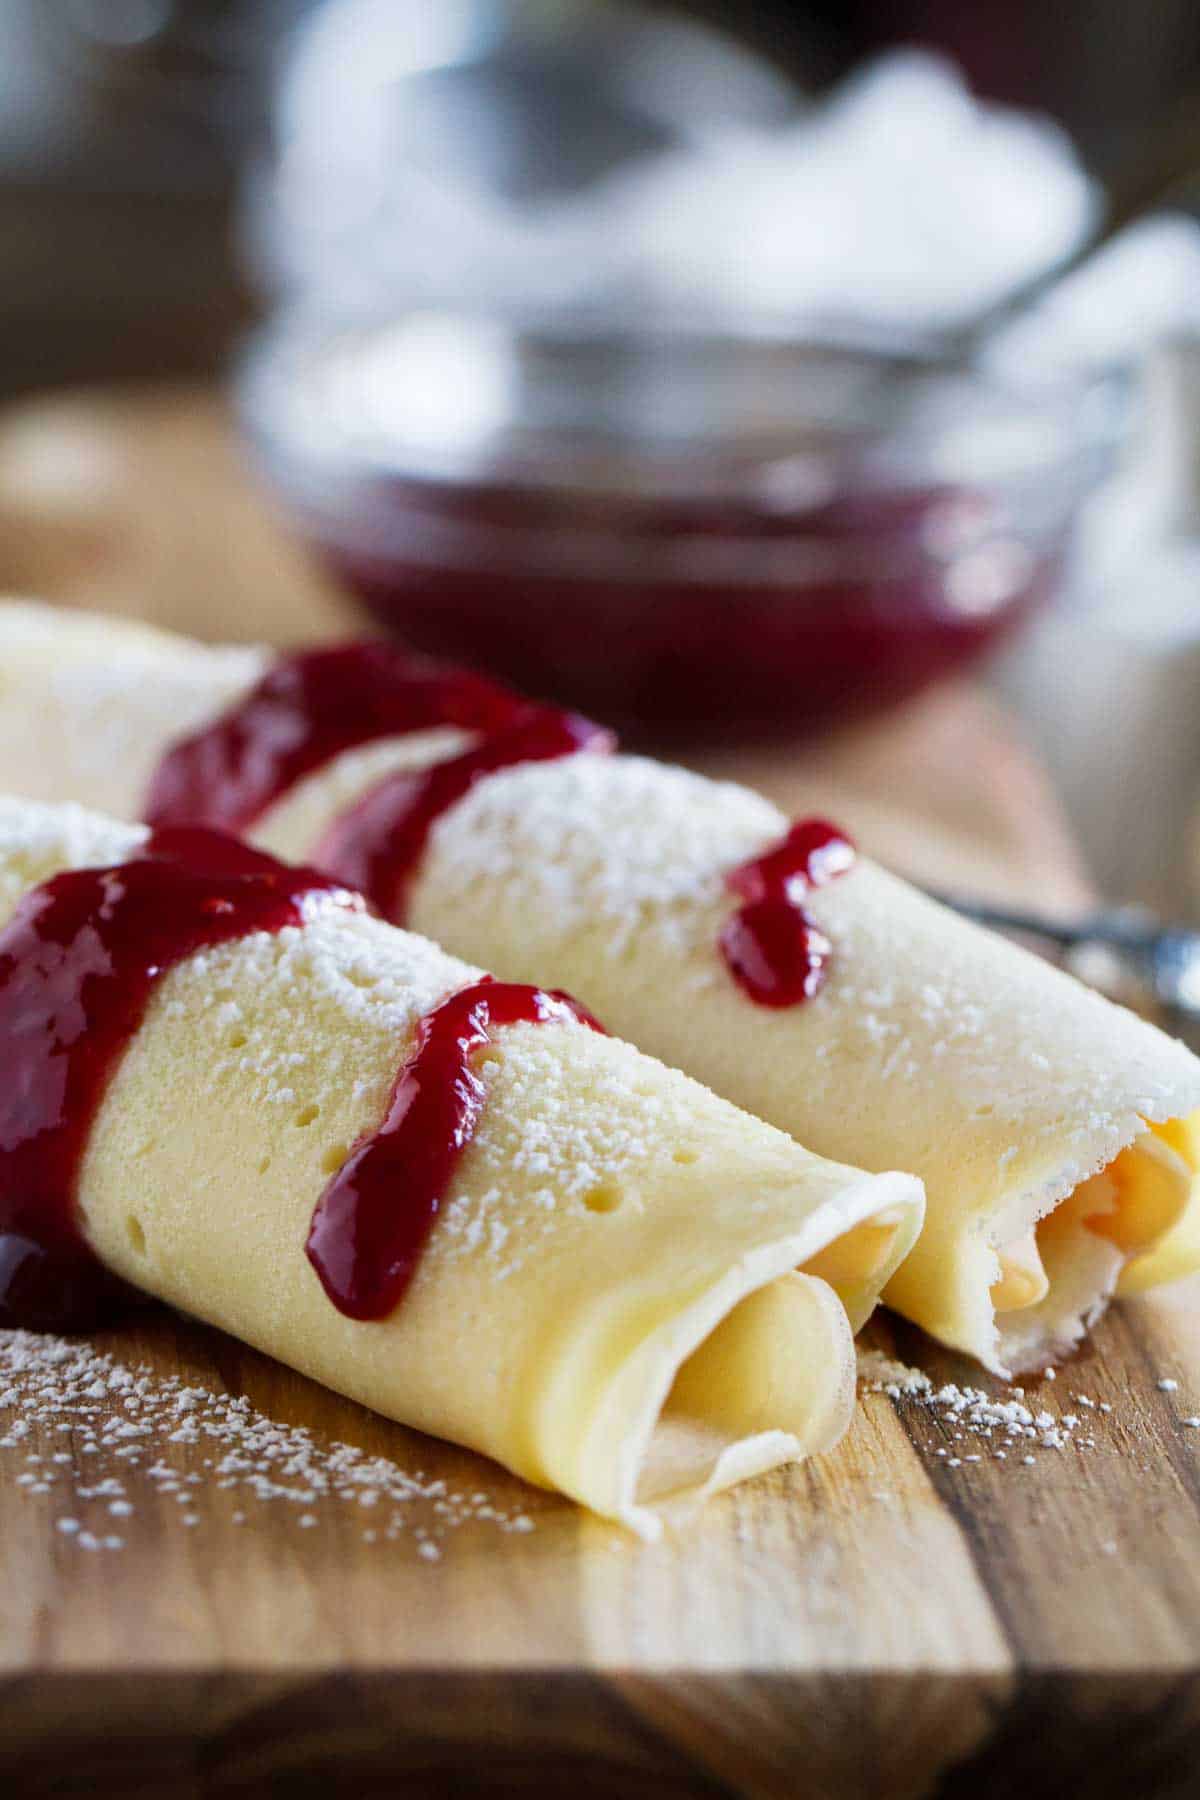 Two rolled monte cristo crepes on a cutting board, topped with jam and powdered sugar.